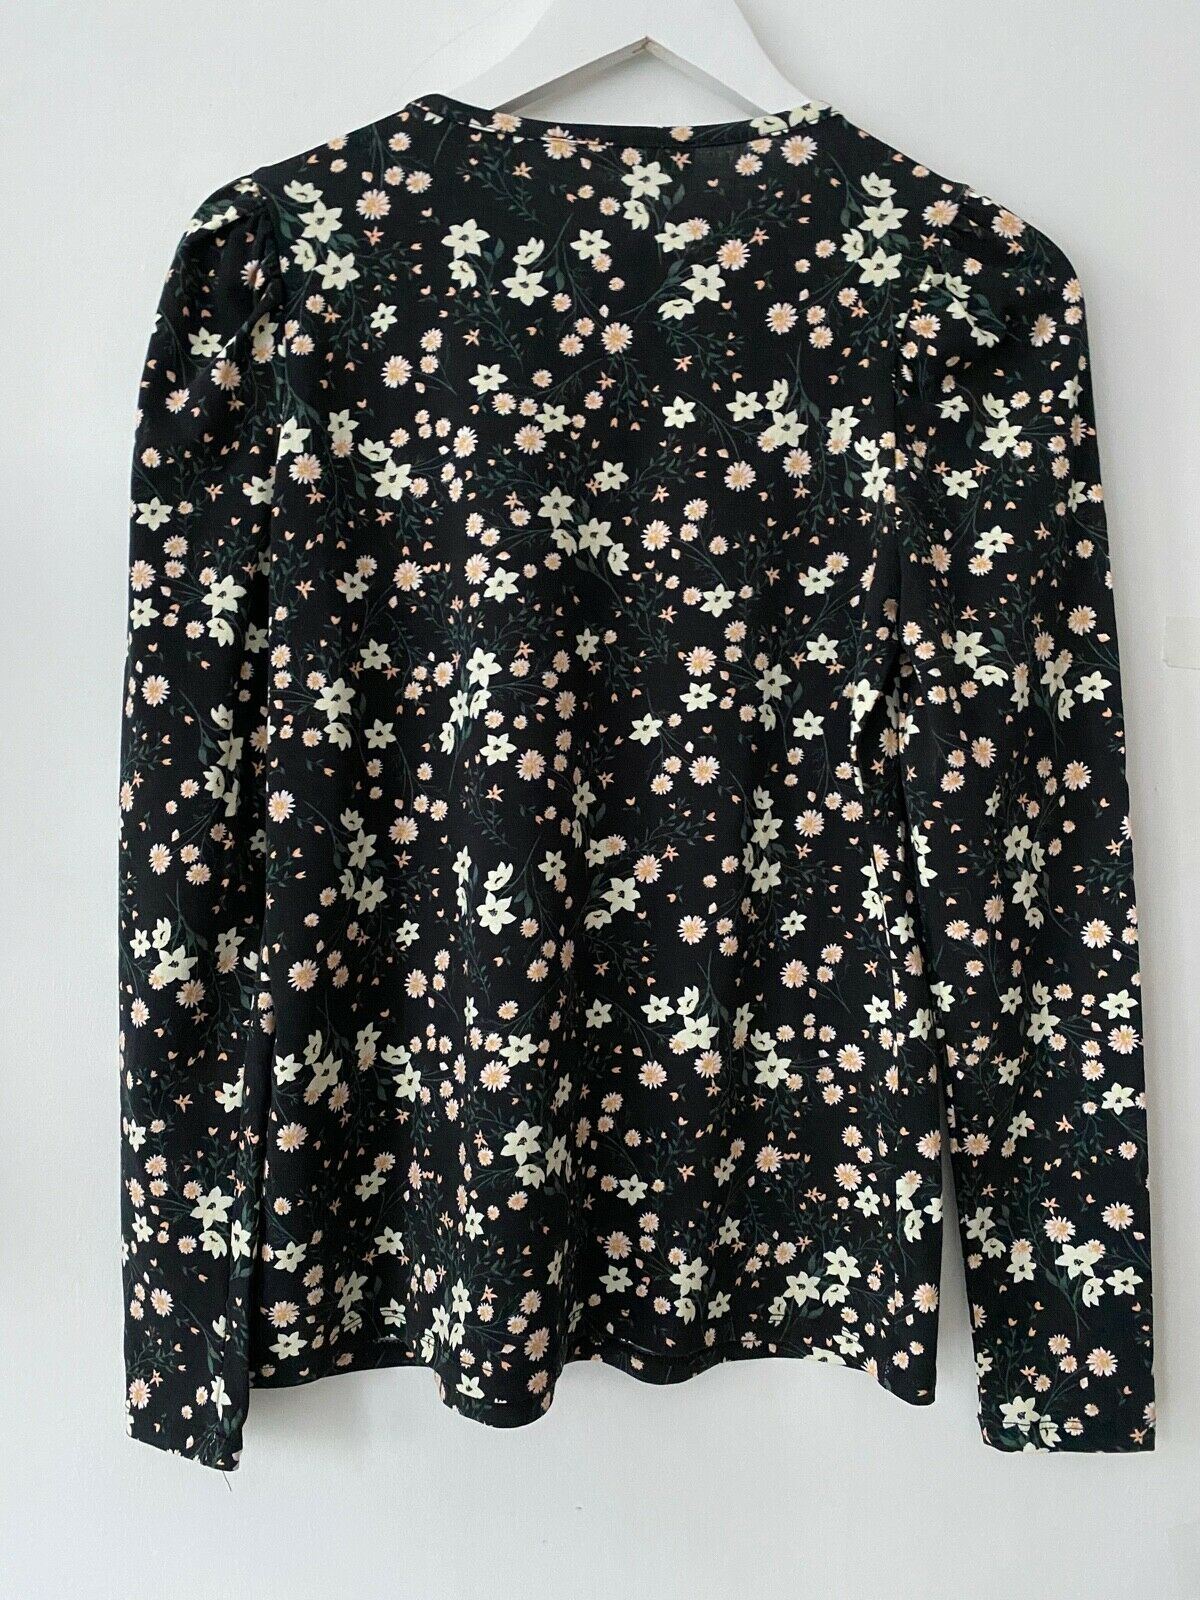 Very Ditsy Floral Long Sleeve T-Shirt Size 10